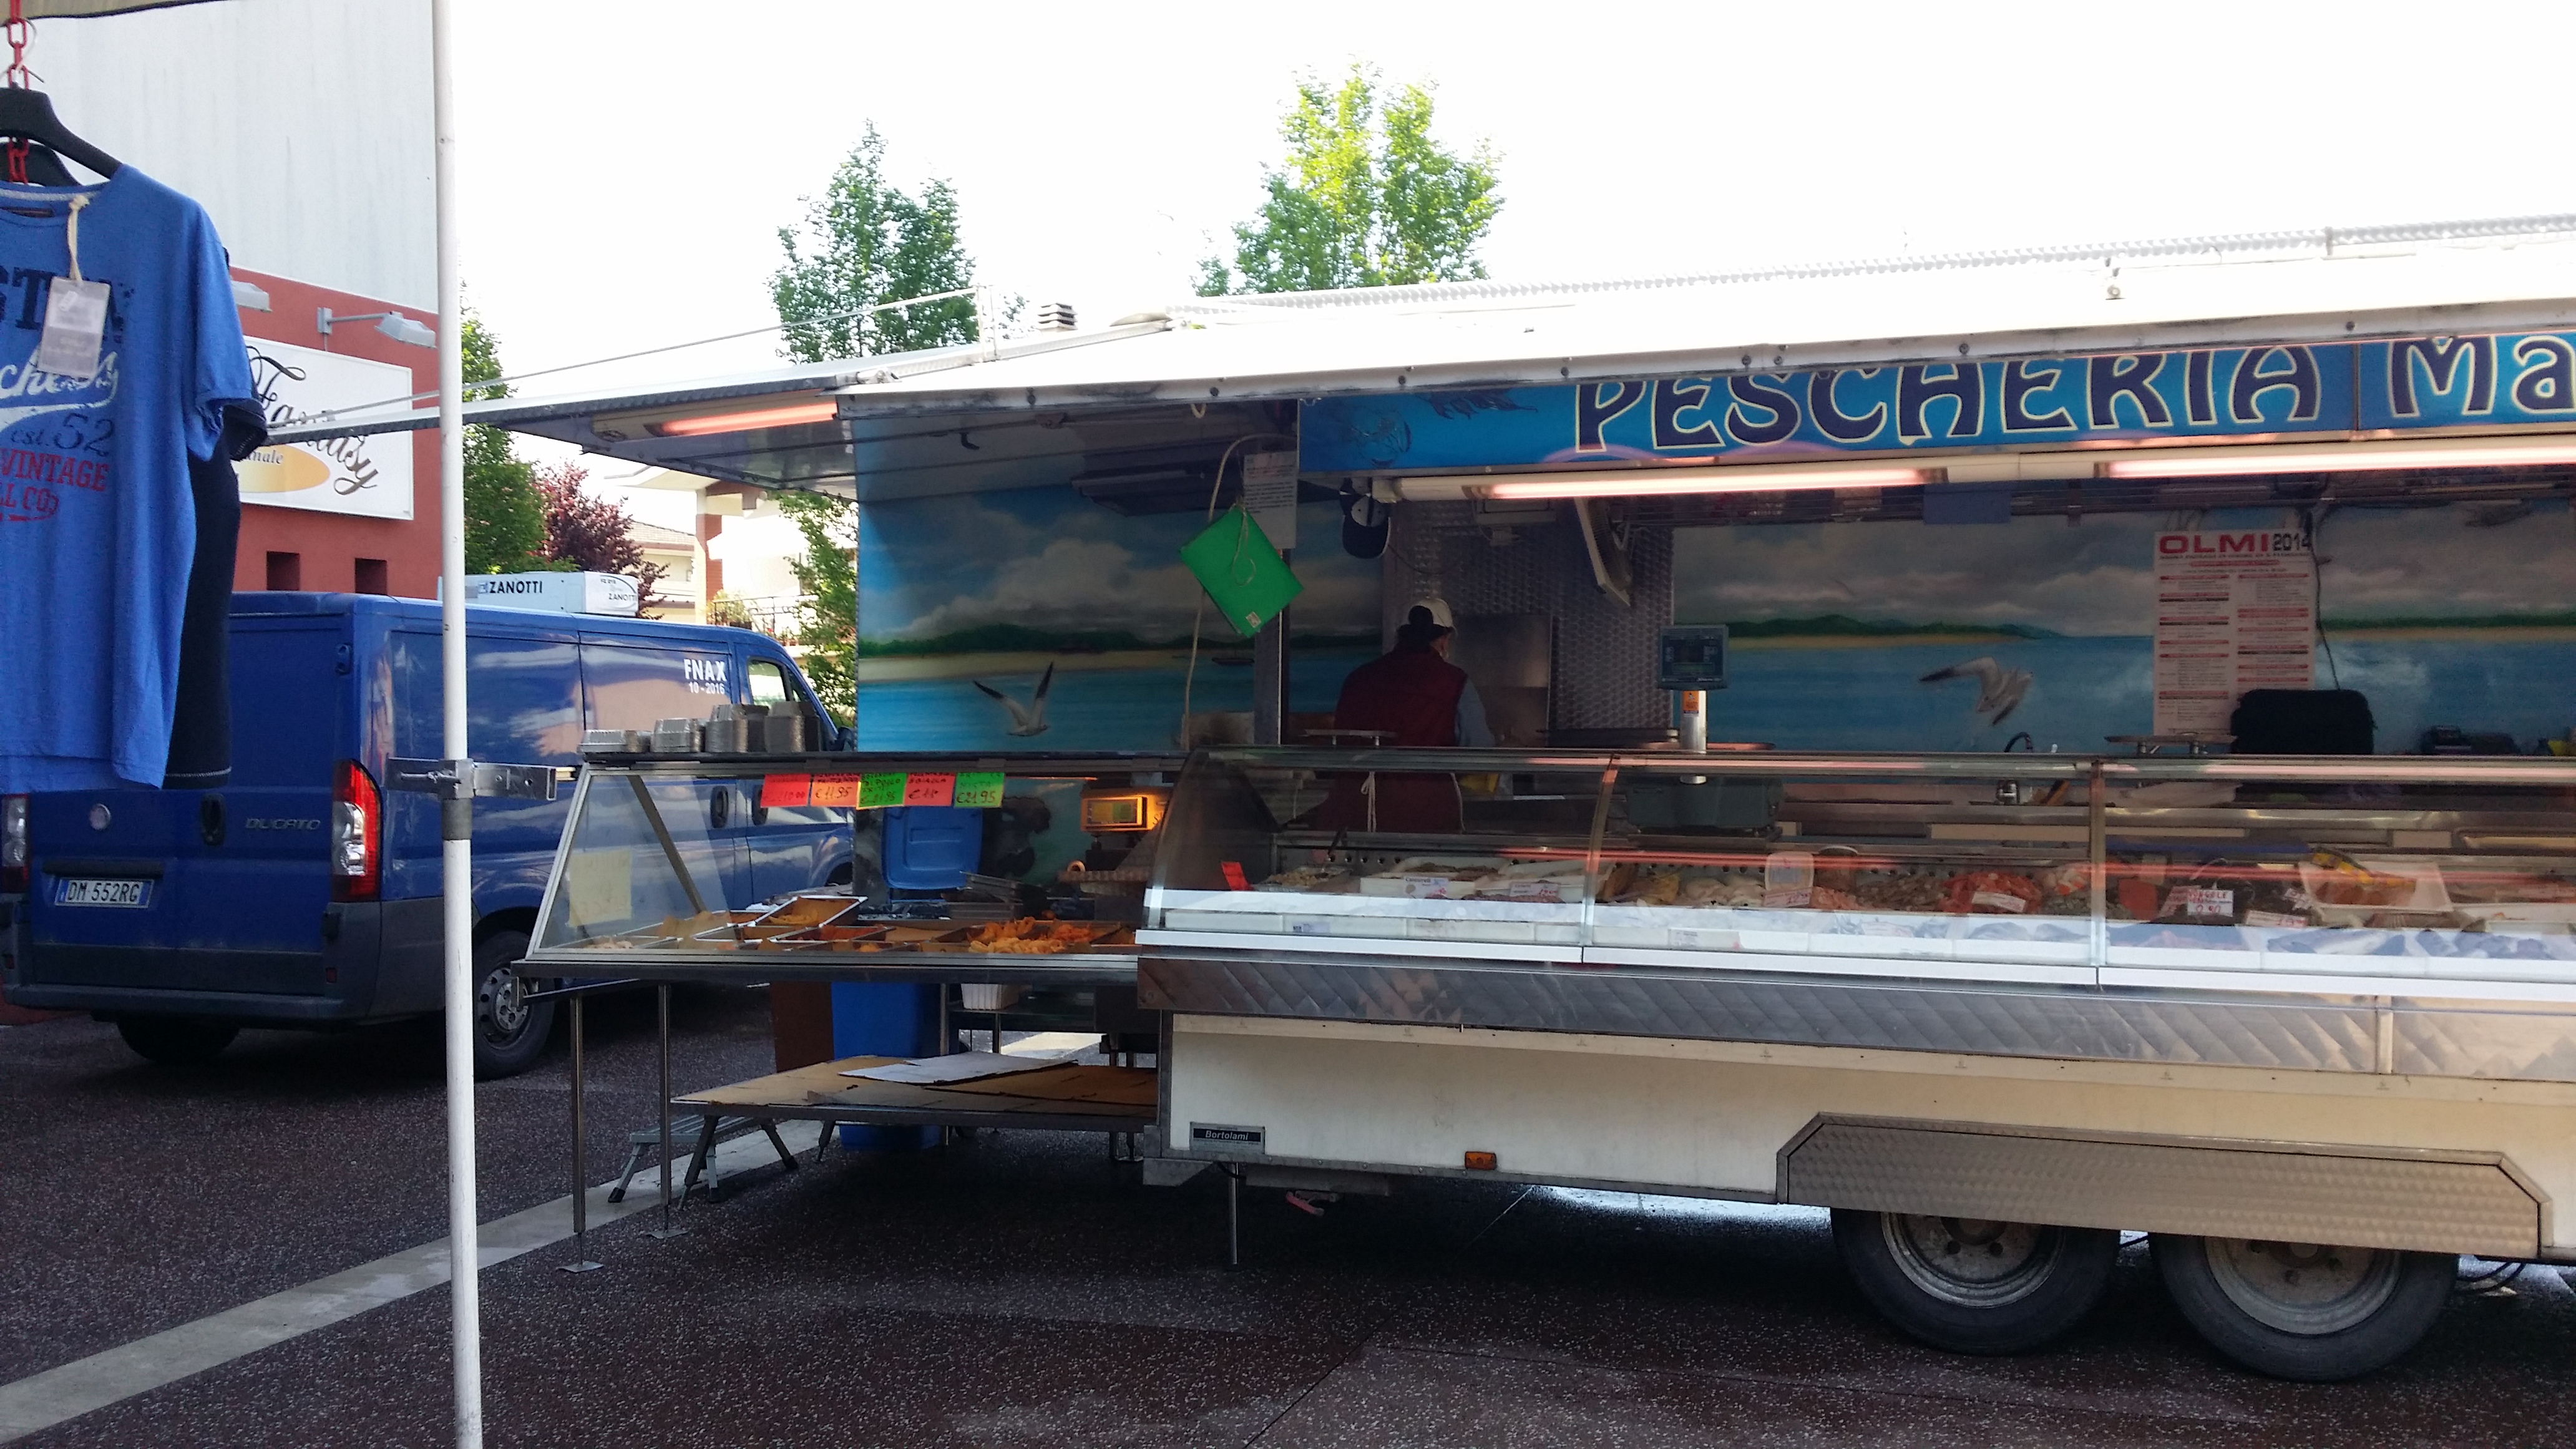 Mobile vending stall for fish products and cooked items